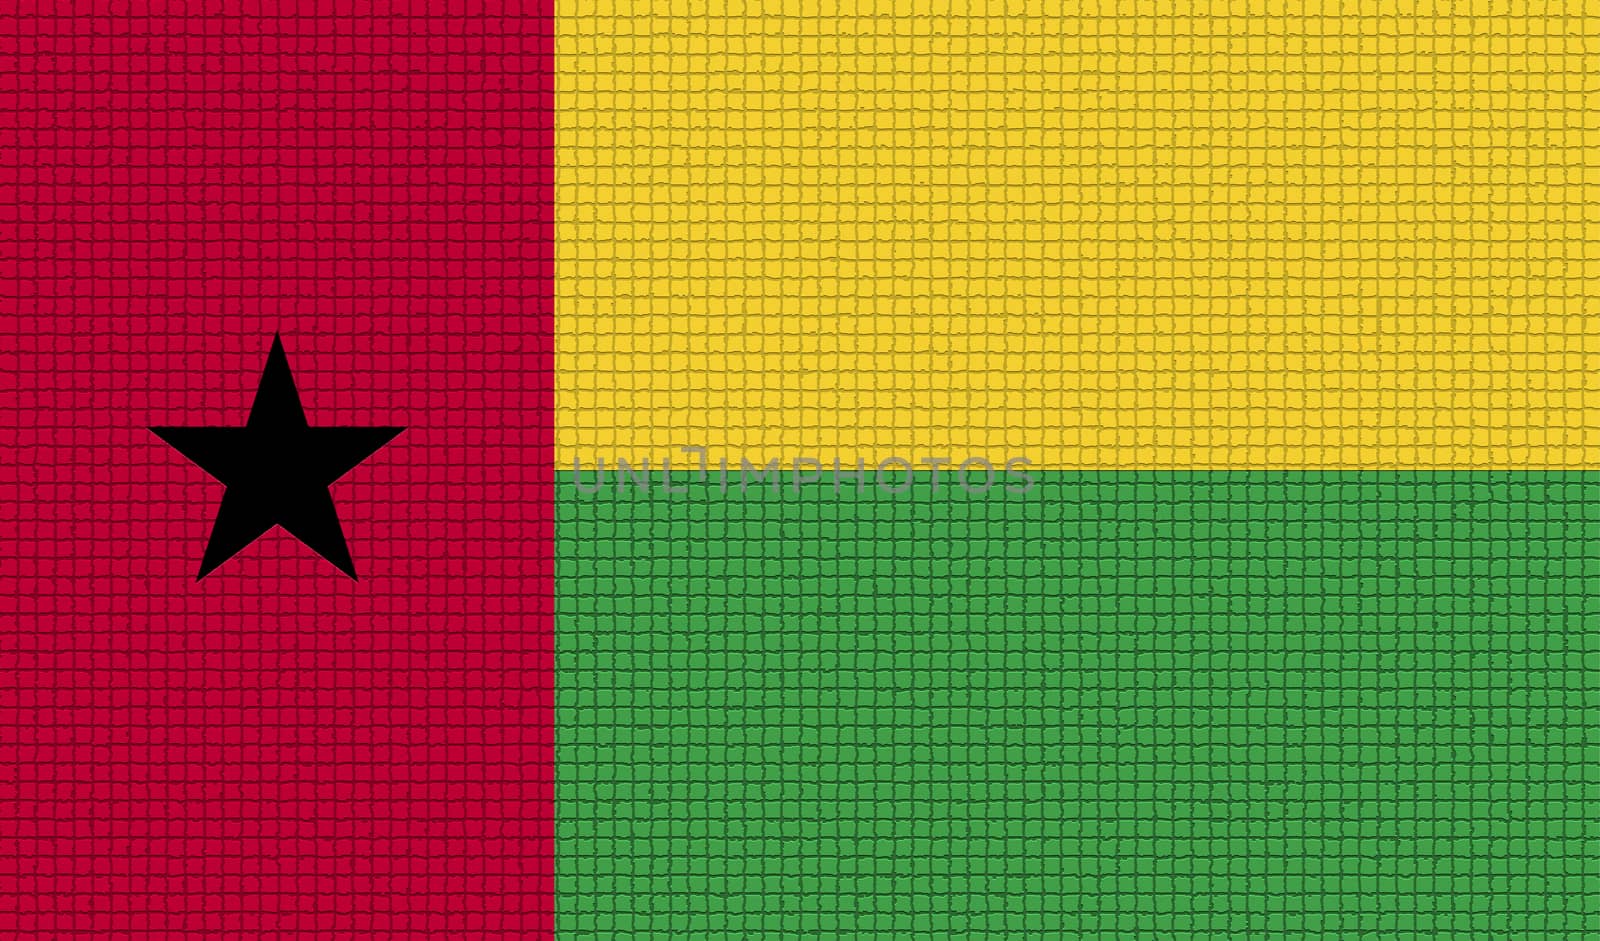 Flags of GuineaBissau with abstract textures. Rasterized version